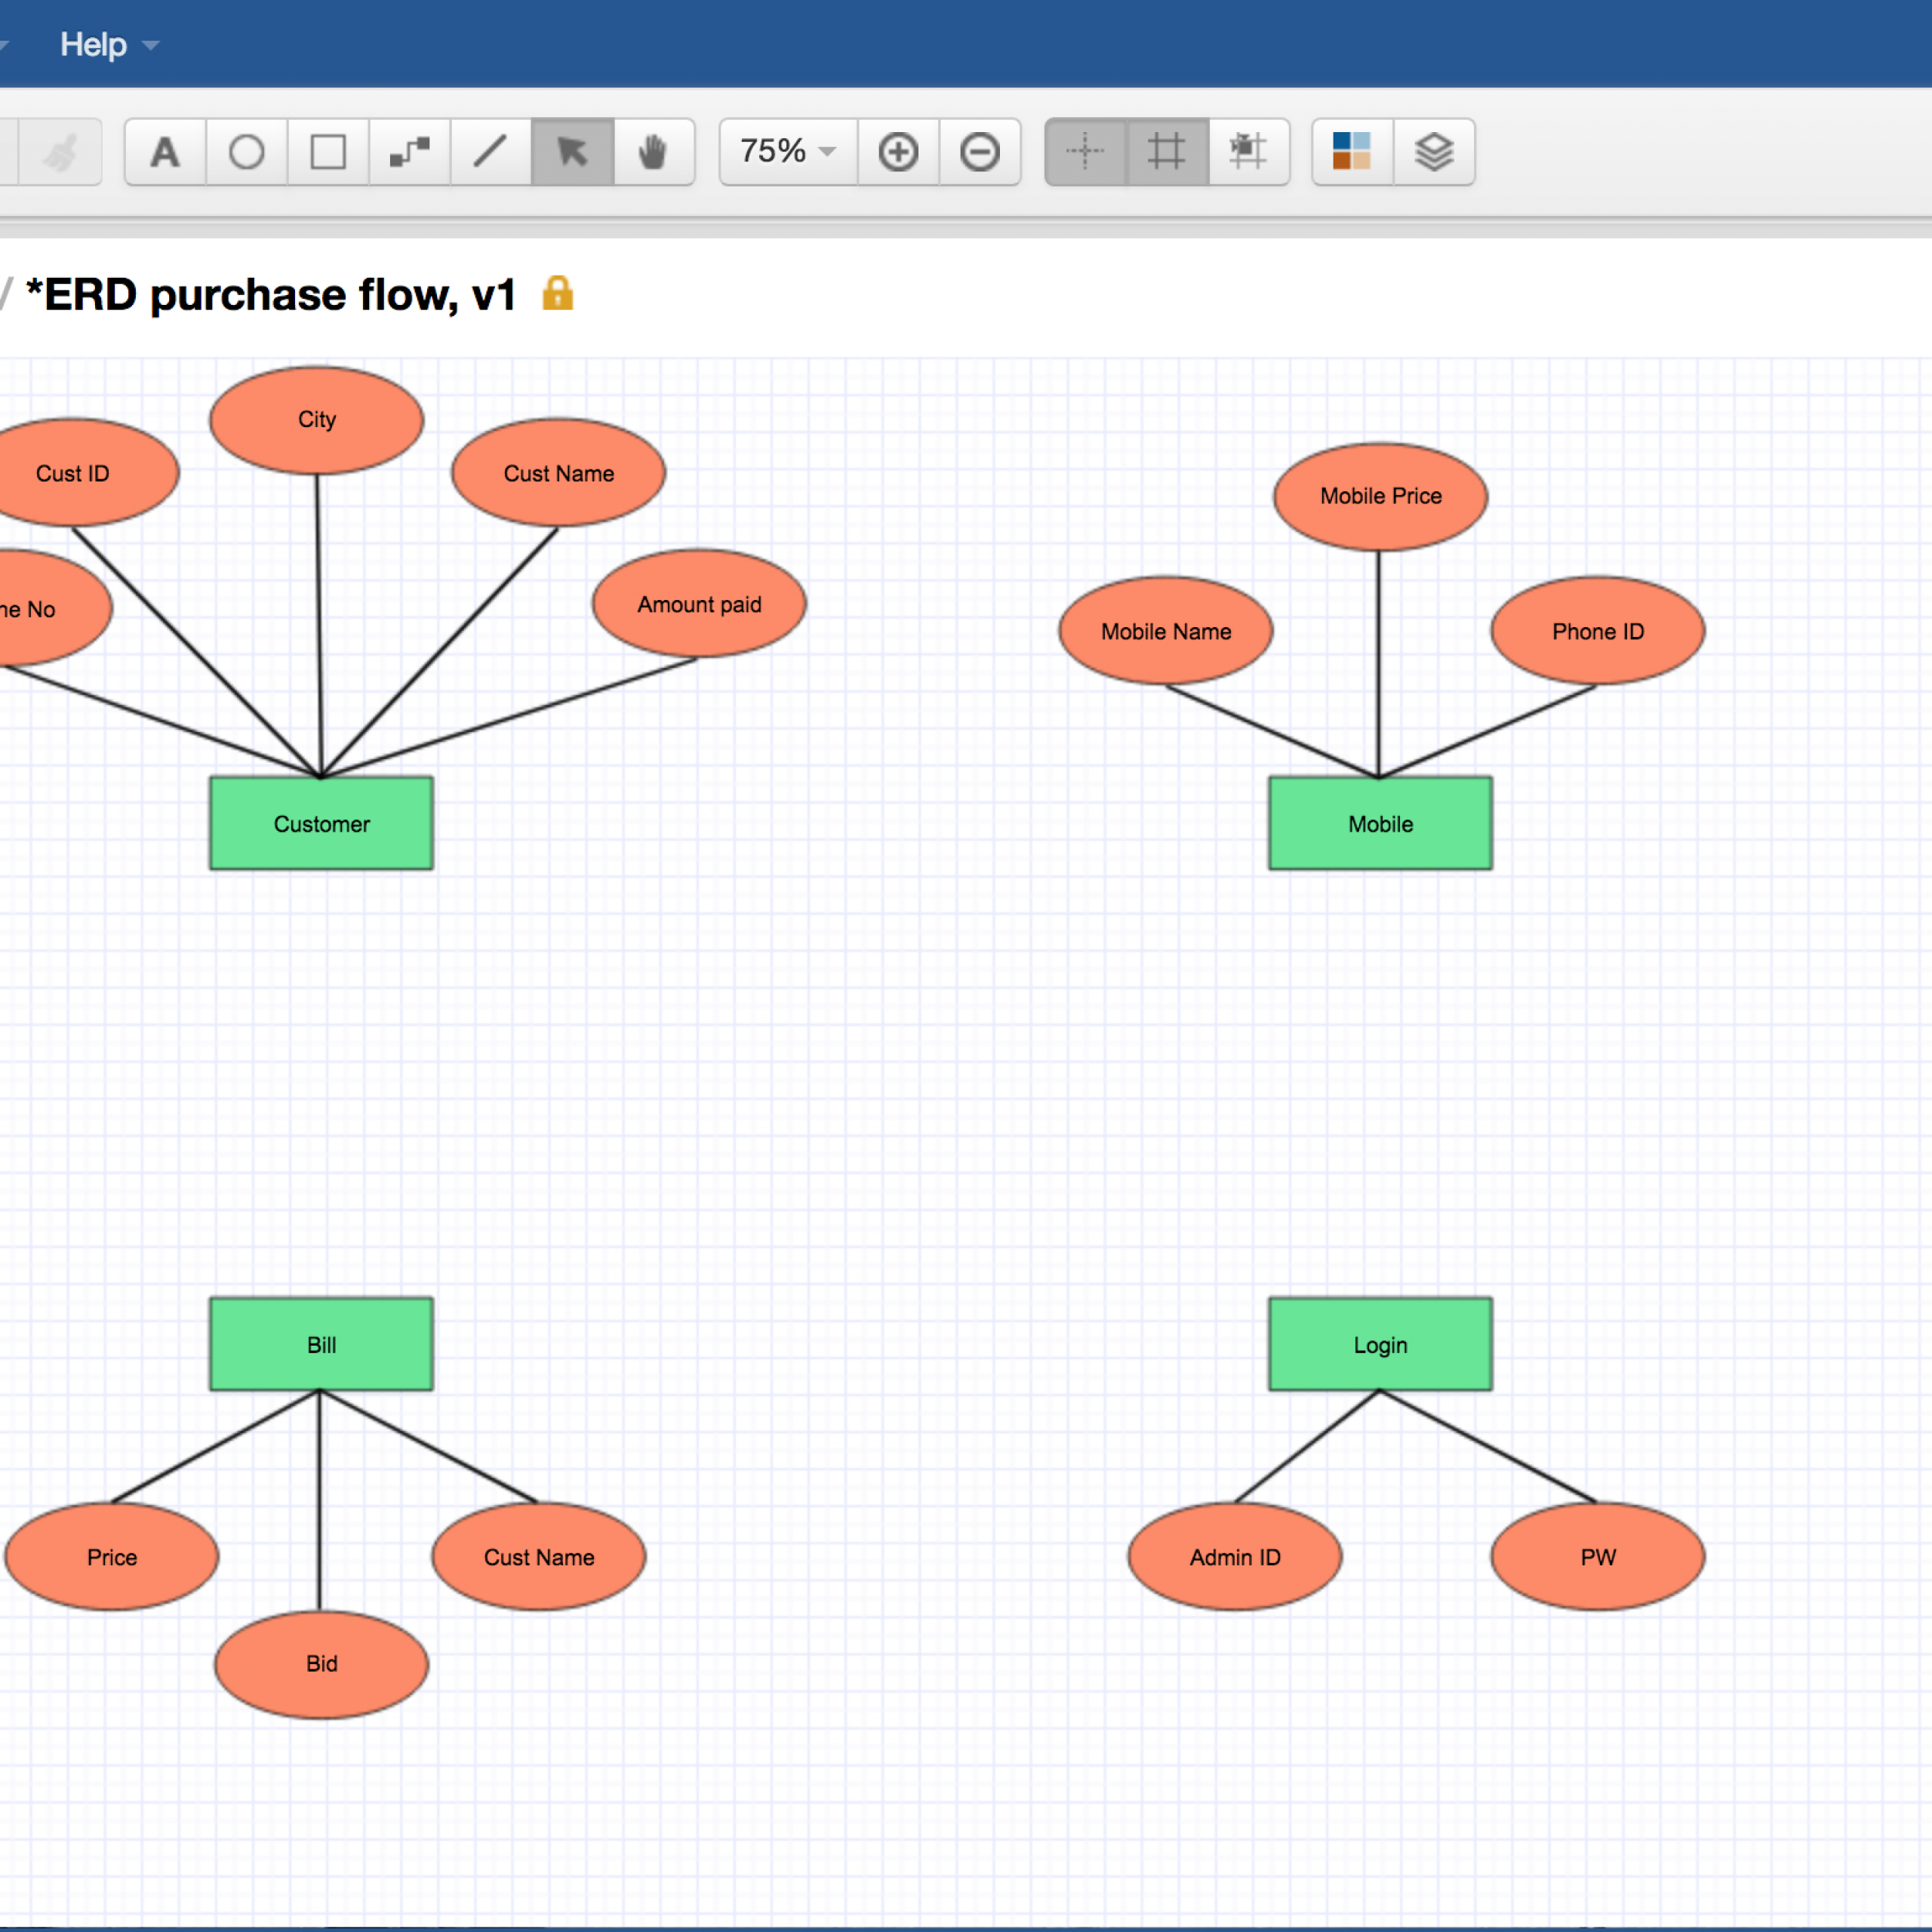 How To Draw An Entity-Relationship Diagram throughout Types Of Er Diagram